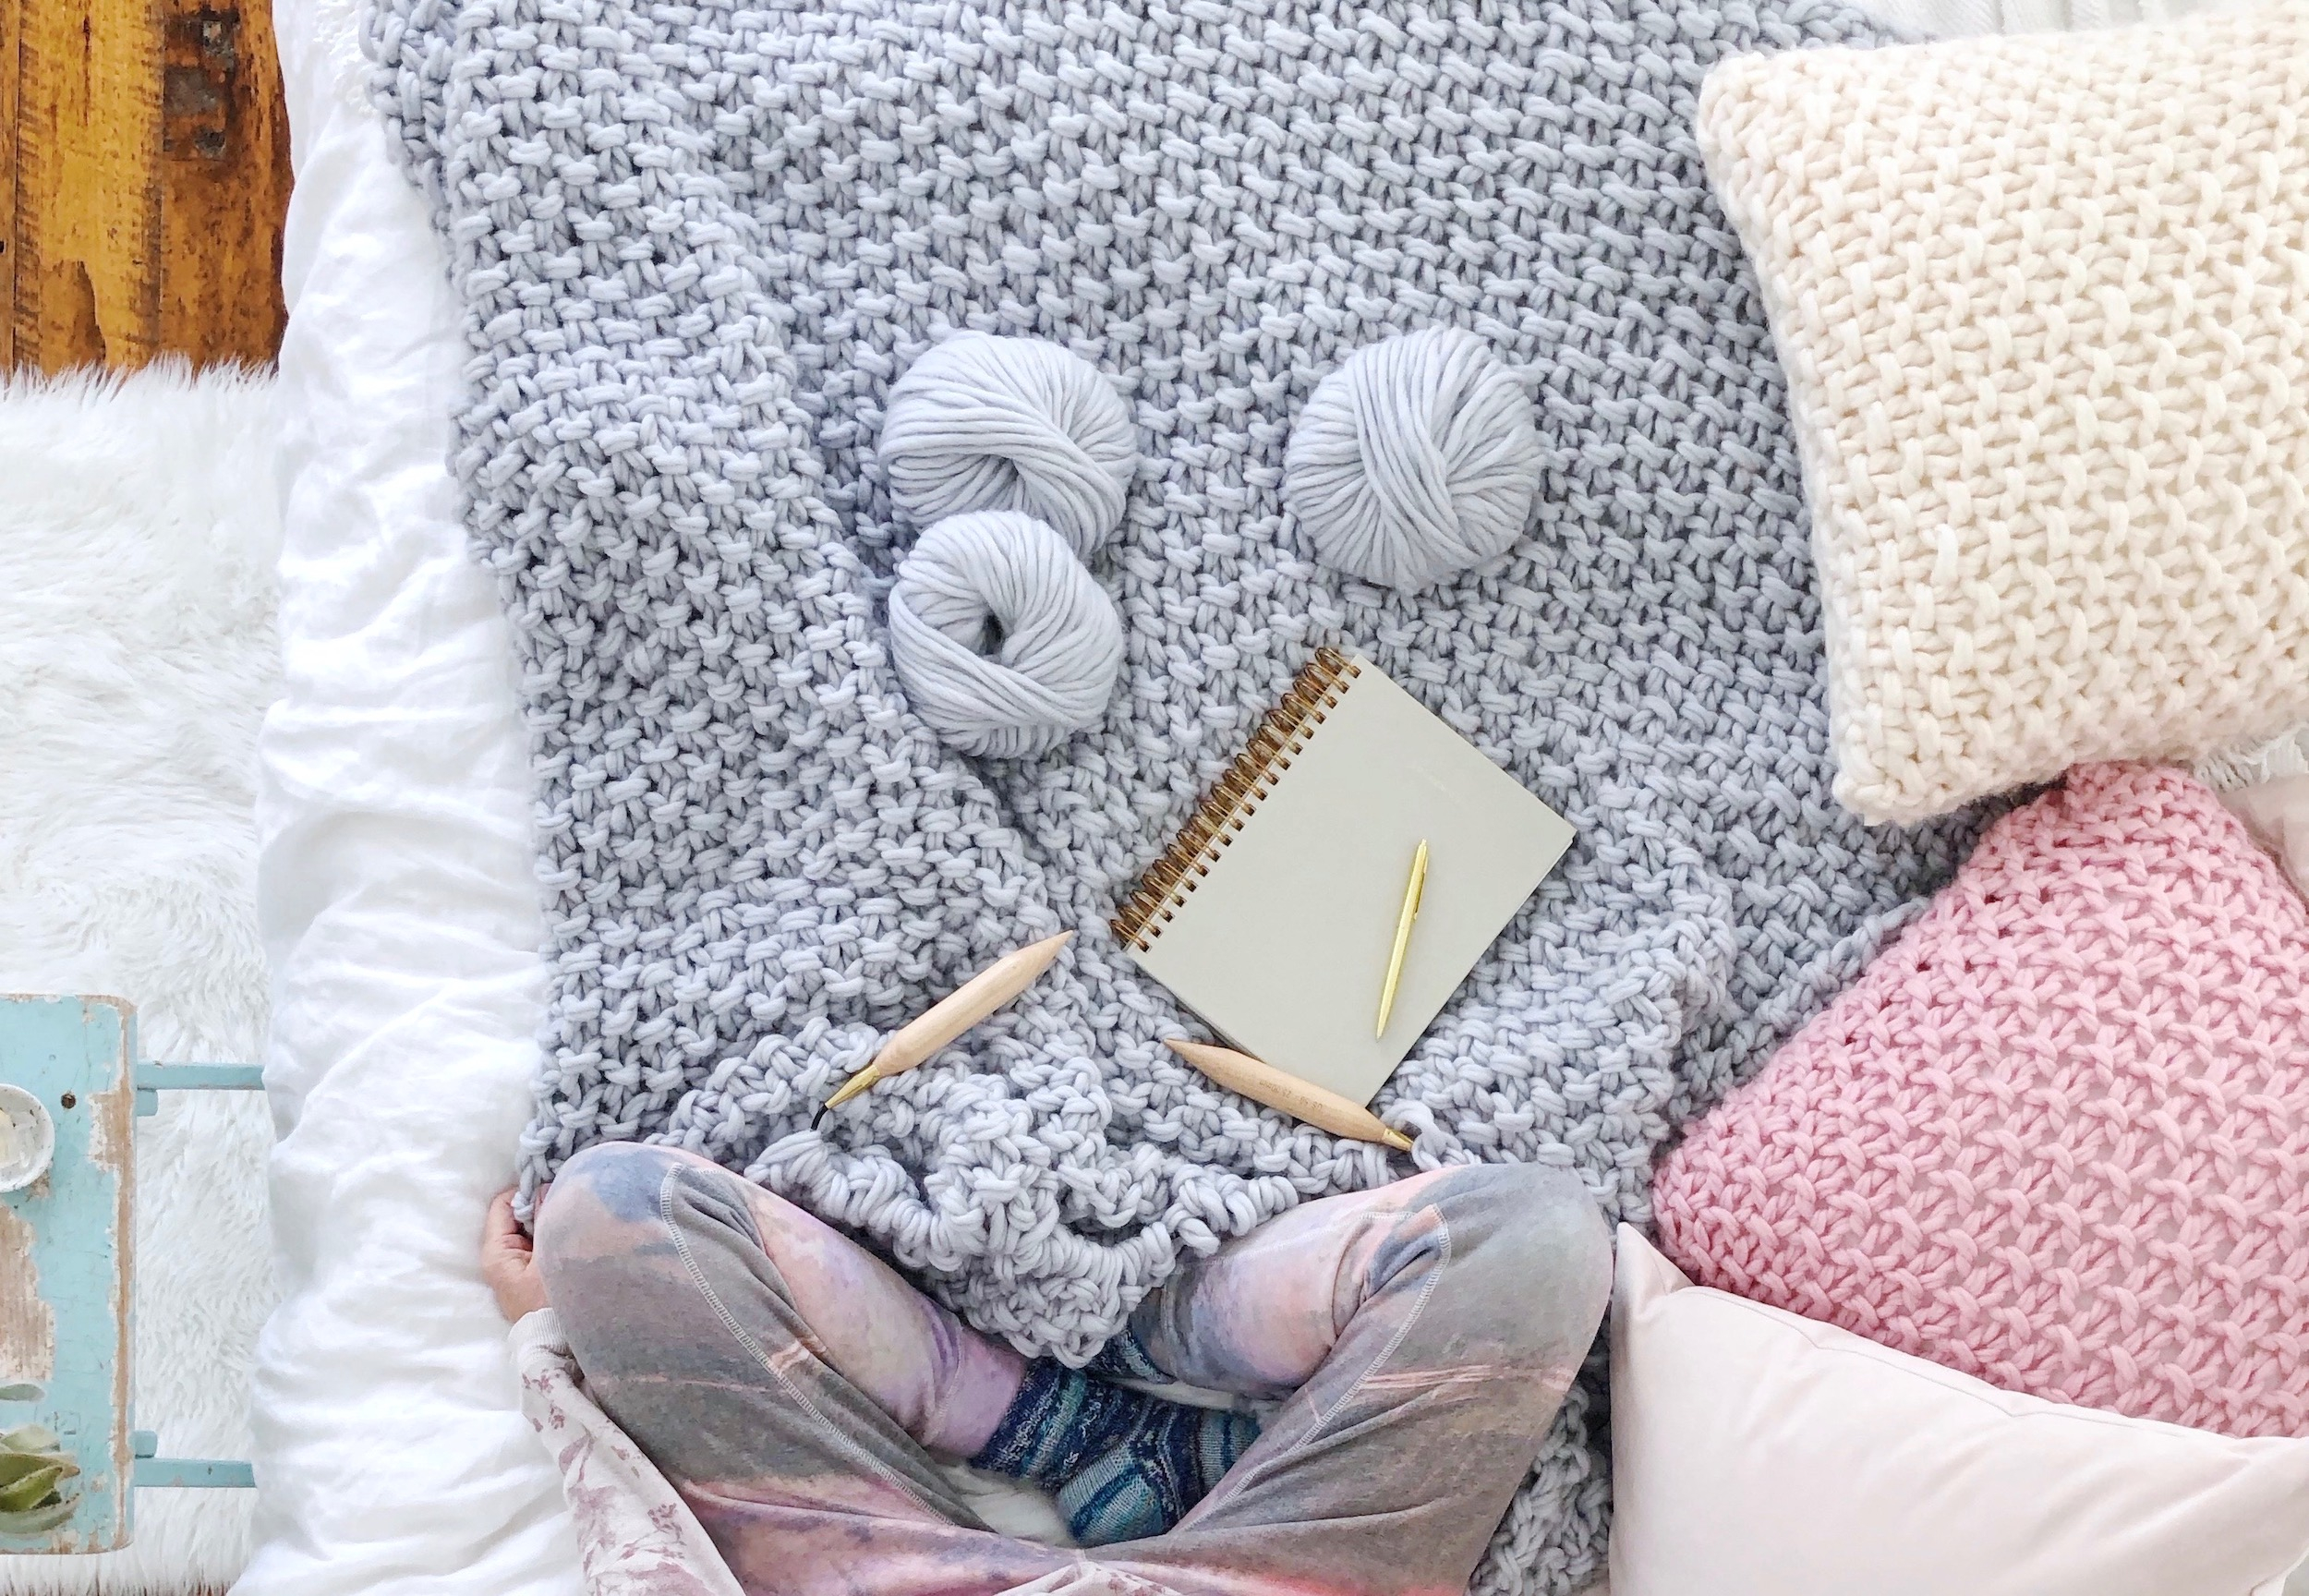 Chunky Wool Throw Knitting Pattern How To Make The Most Insanely Beautiful Chunky Knit Blanket In The